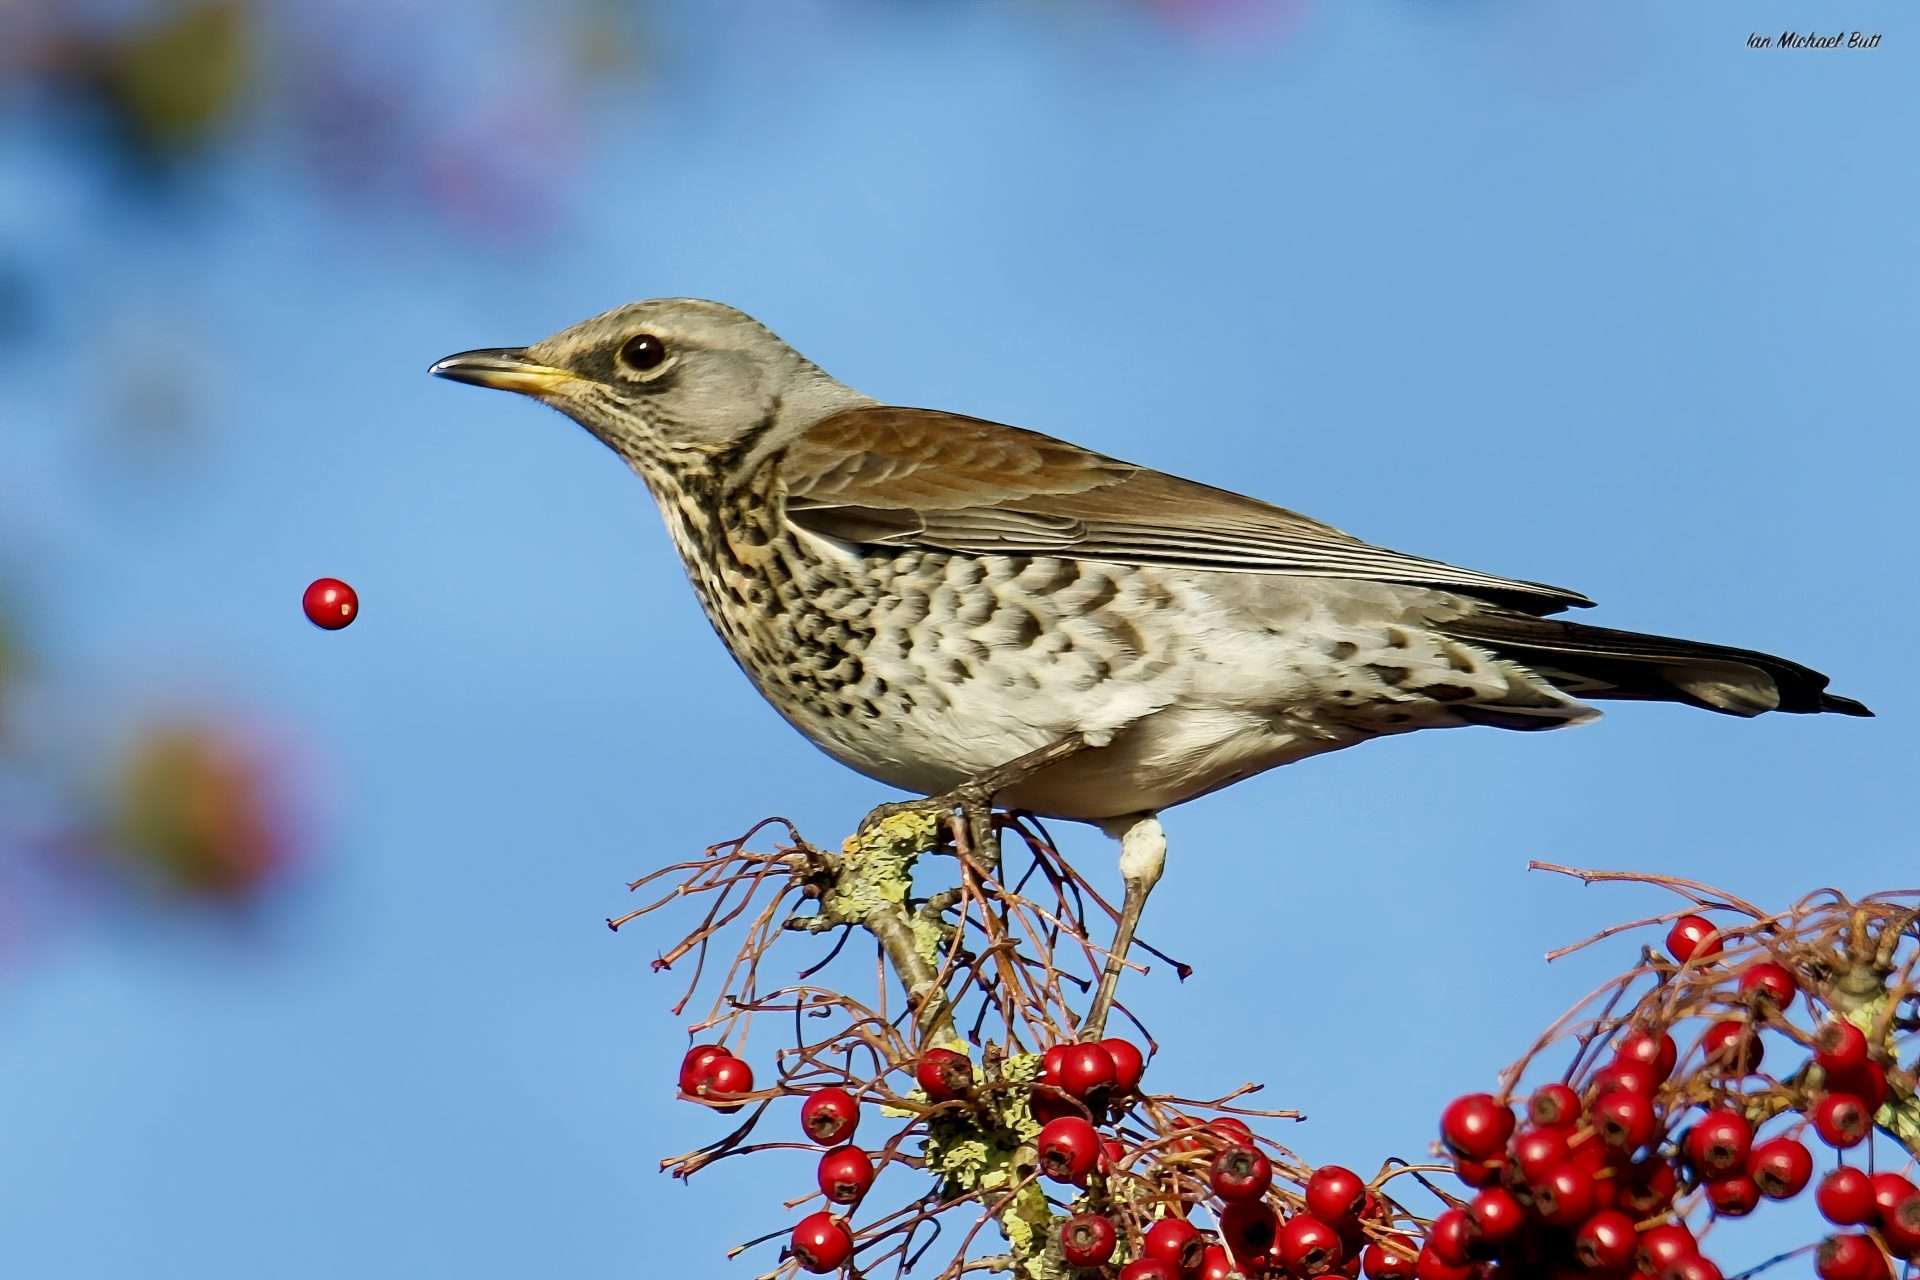 Fieldfare by Ian Butt at exeter canal turf lock